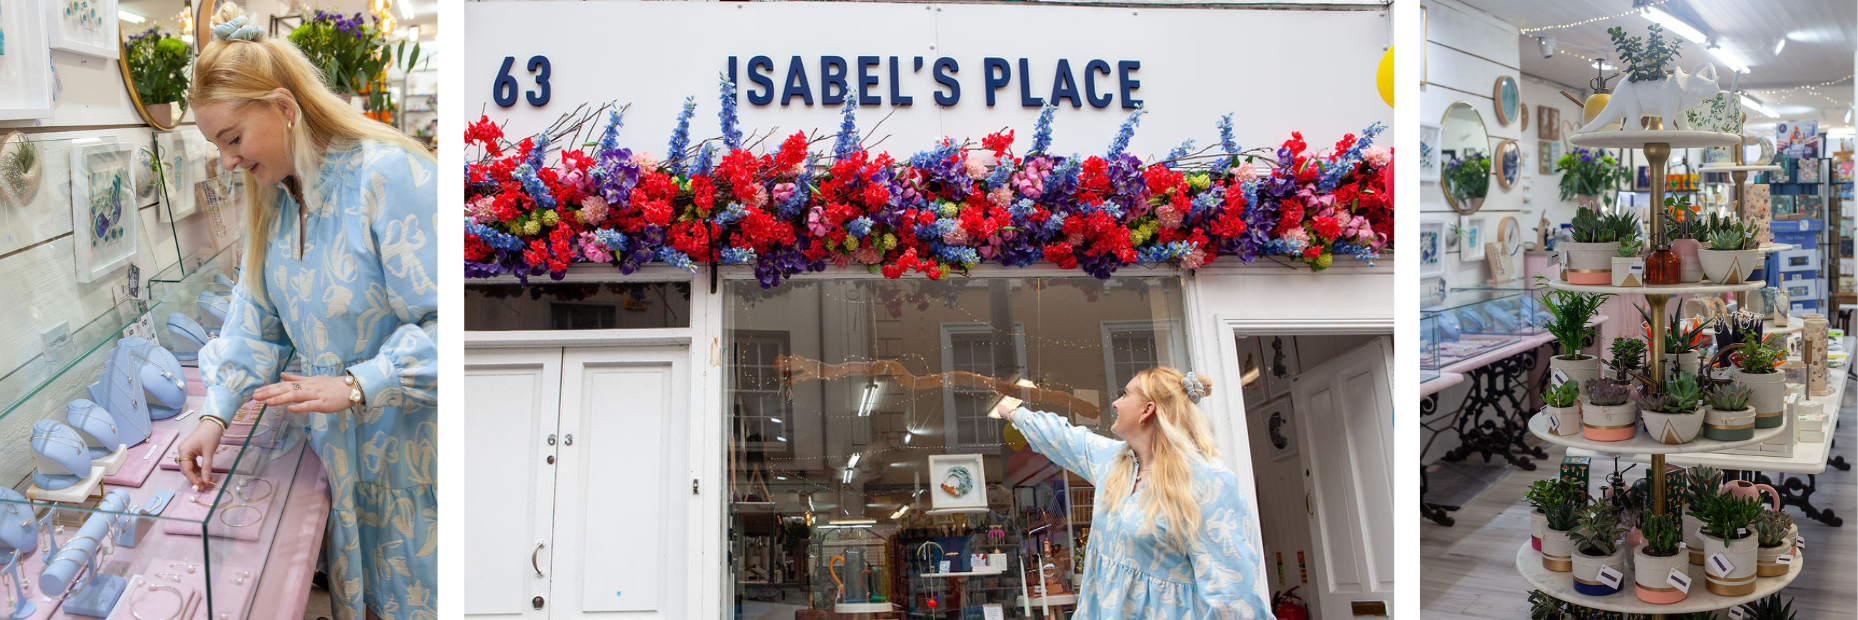 Isabel's Place Dungarvan Website Banner with 3 Photos Showing Exterior and Interior of Shop